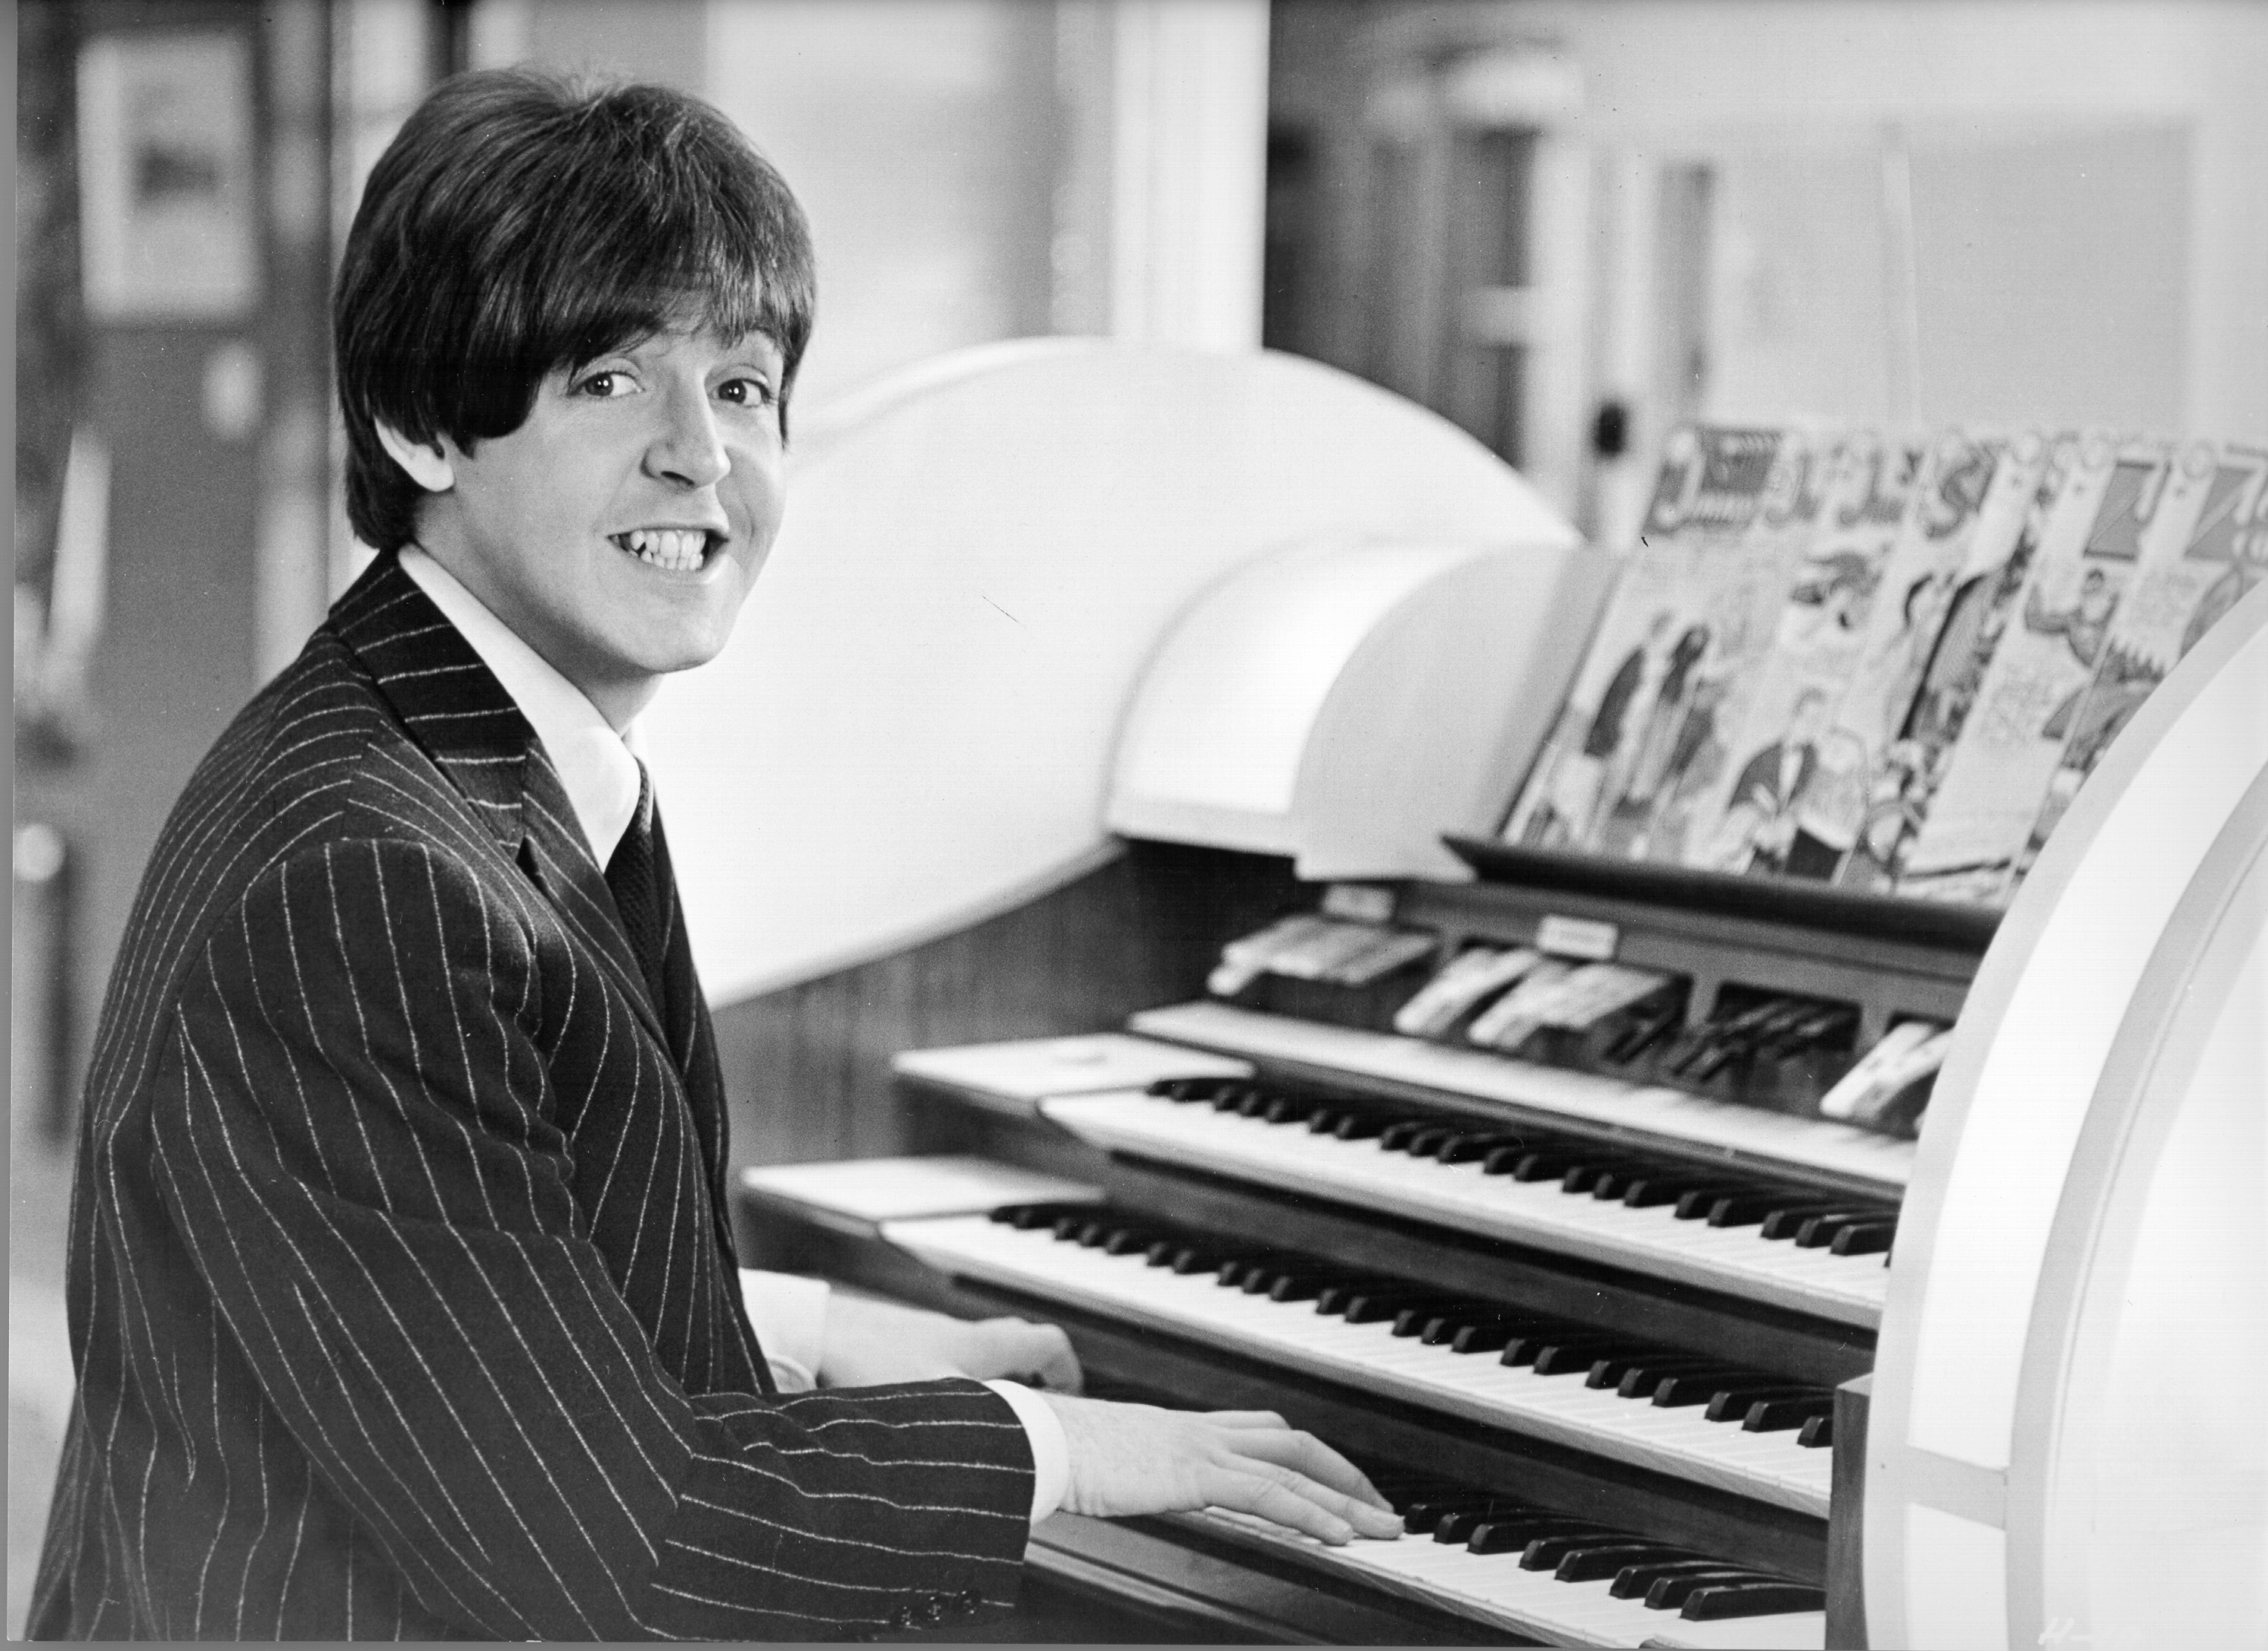 The Beatles' Paul McCartney sitting at a piano